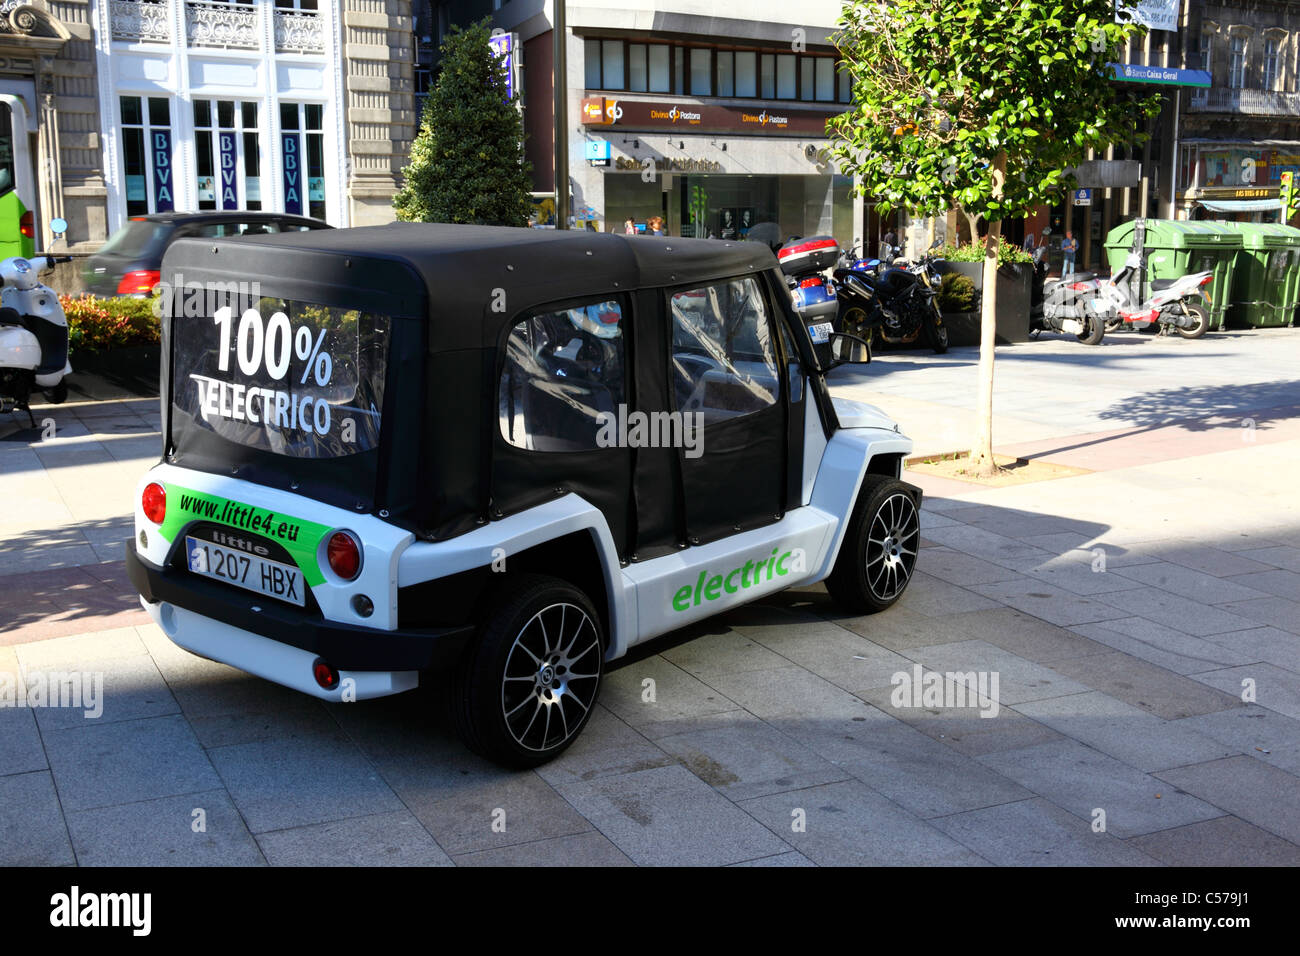 Small Little 4 electric car parked in street, Vigo , Galicia , Spain Stock Photo